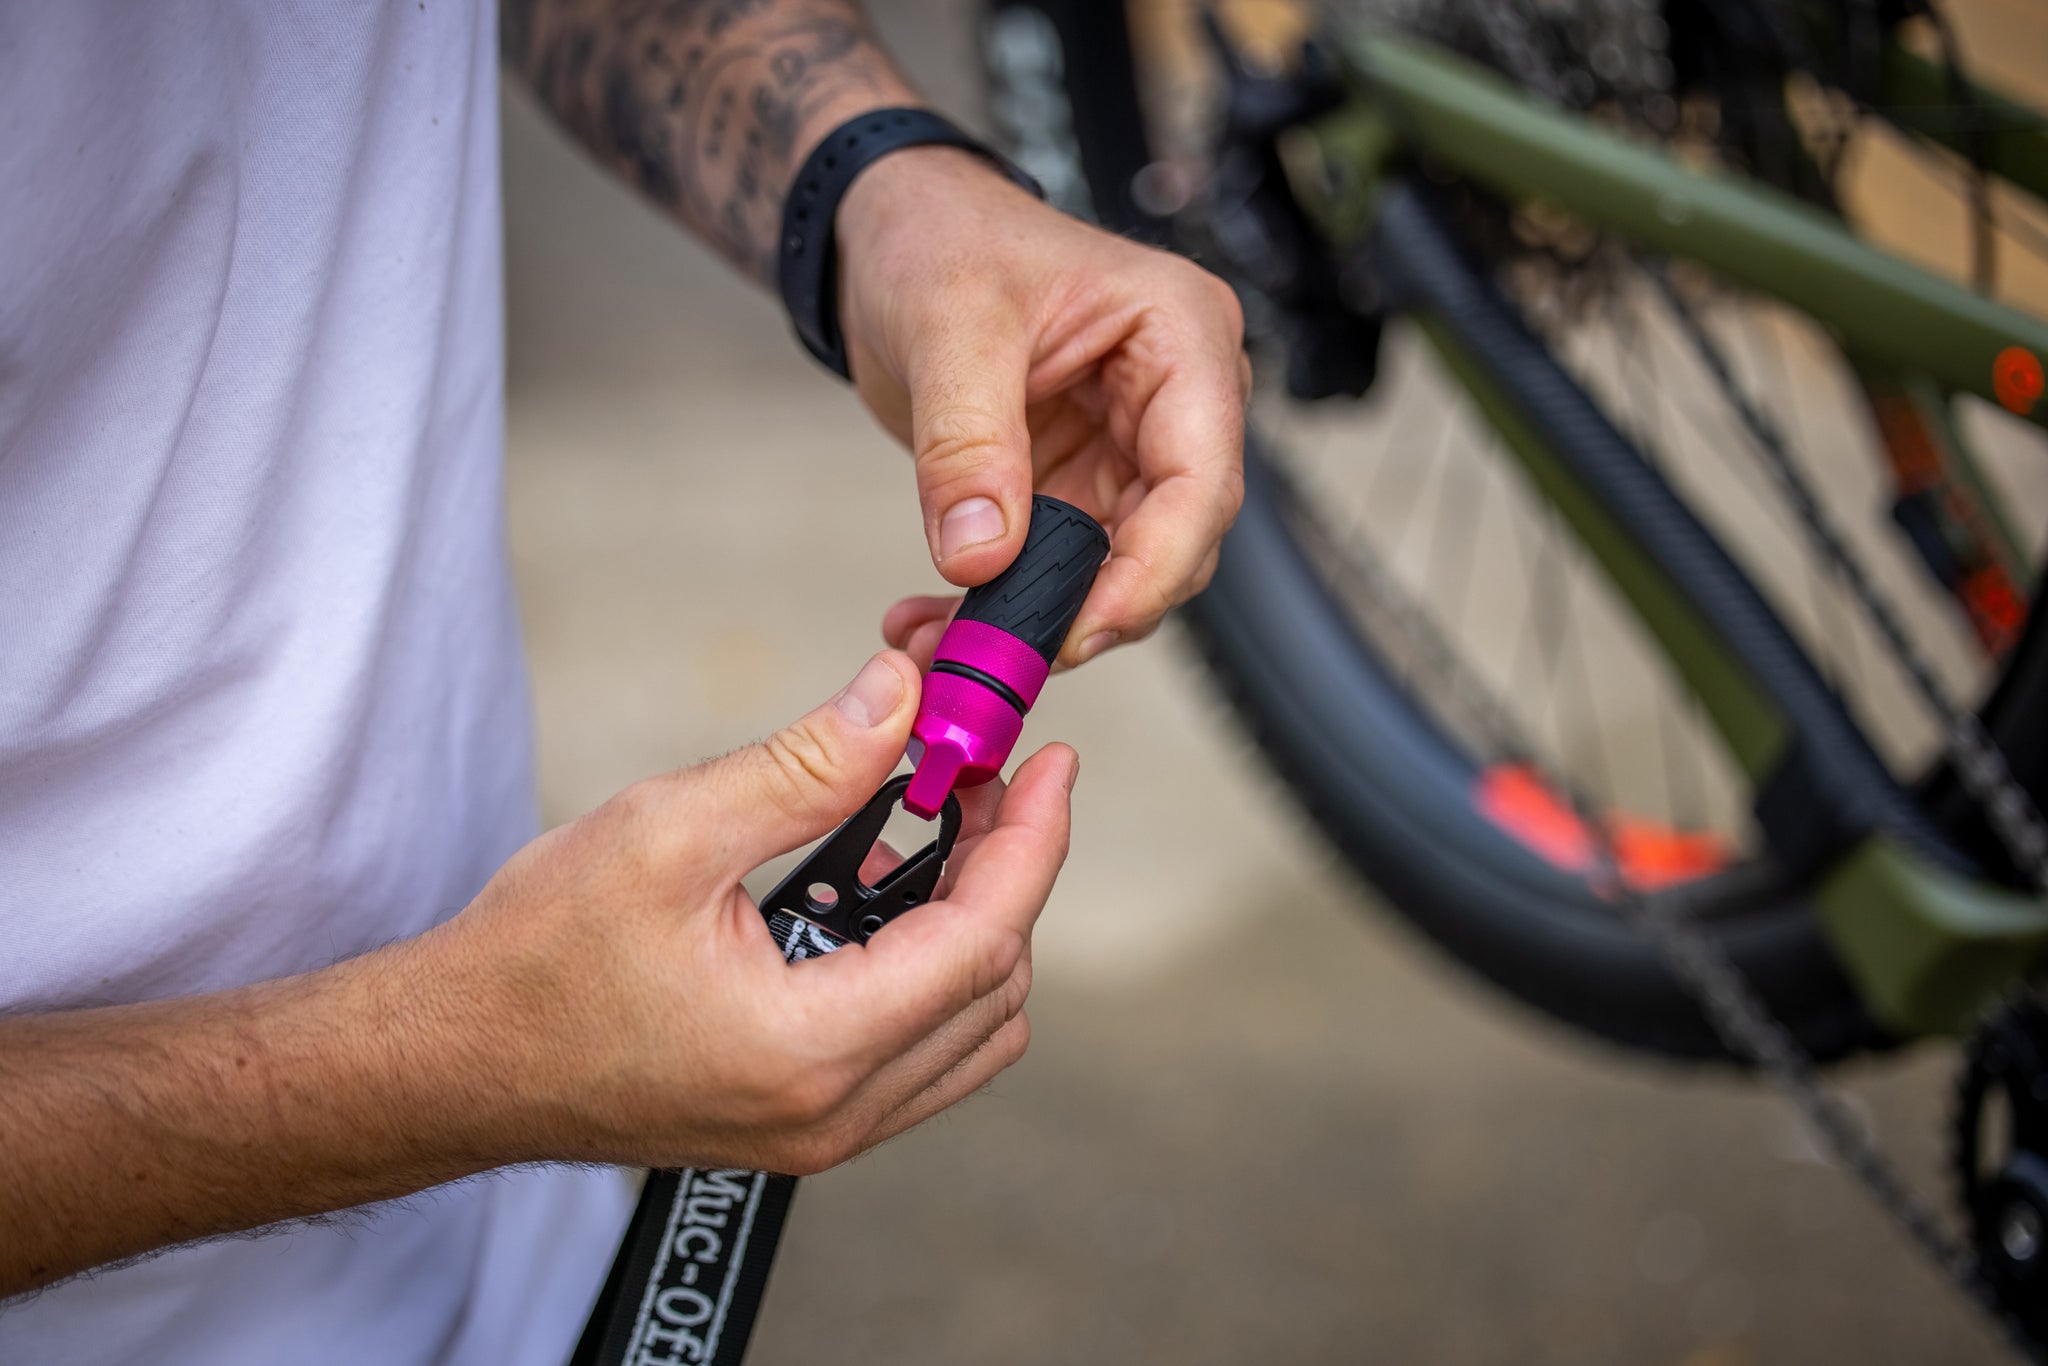 Muc-Off Motorcycle Products: The Best Way to Clean Your Bike All